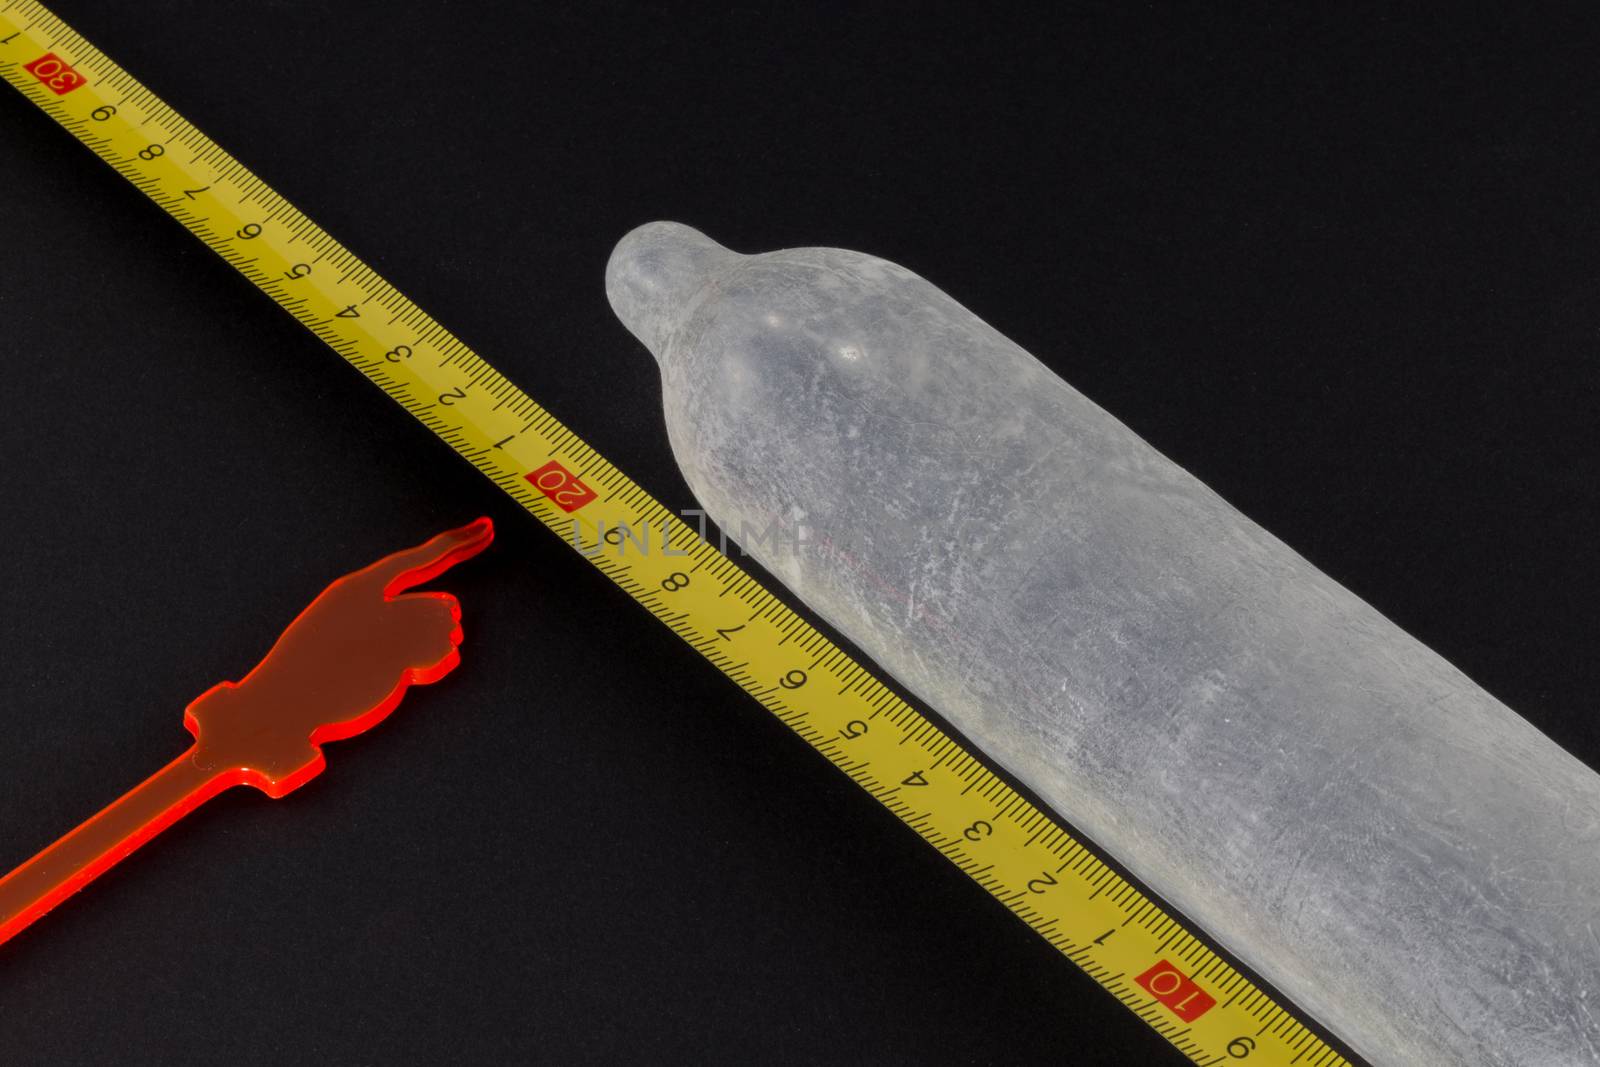 Inflated condom next to measuring tape, pointer to twenty centimeters mark